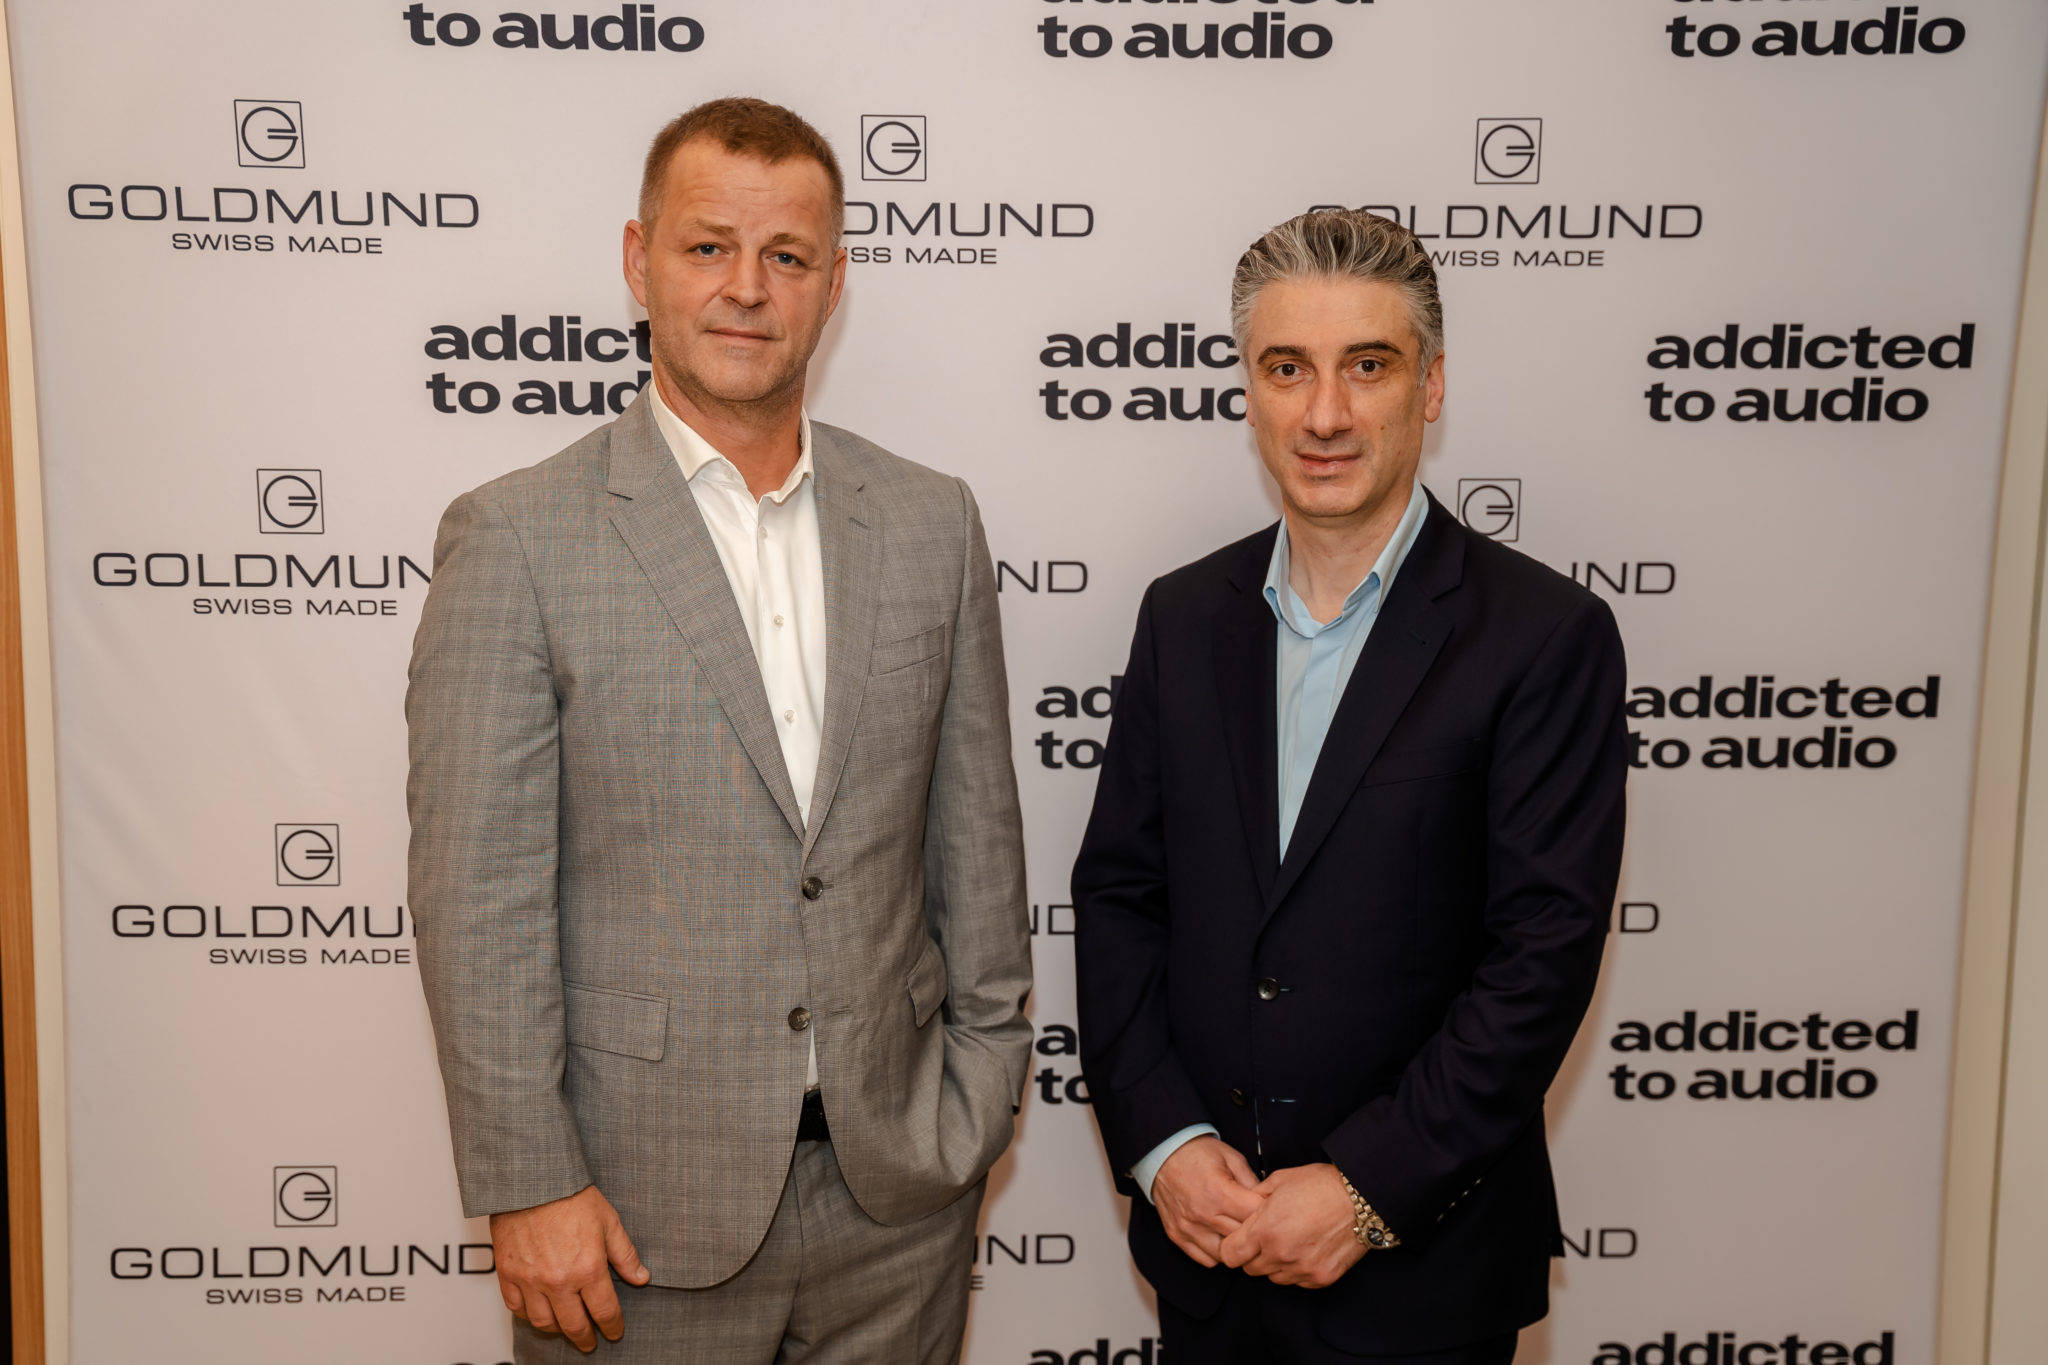 Carsten Roth - Goldmund CEO & George Poutikatidis - Addicted to Audio founder